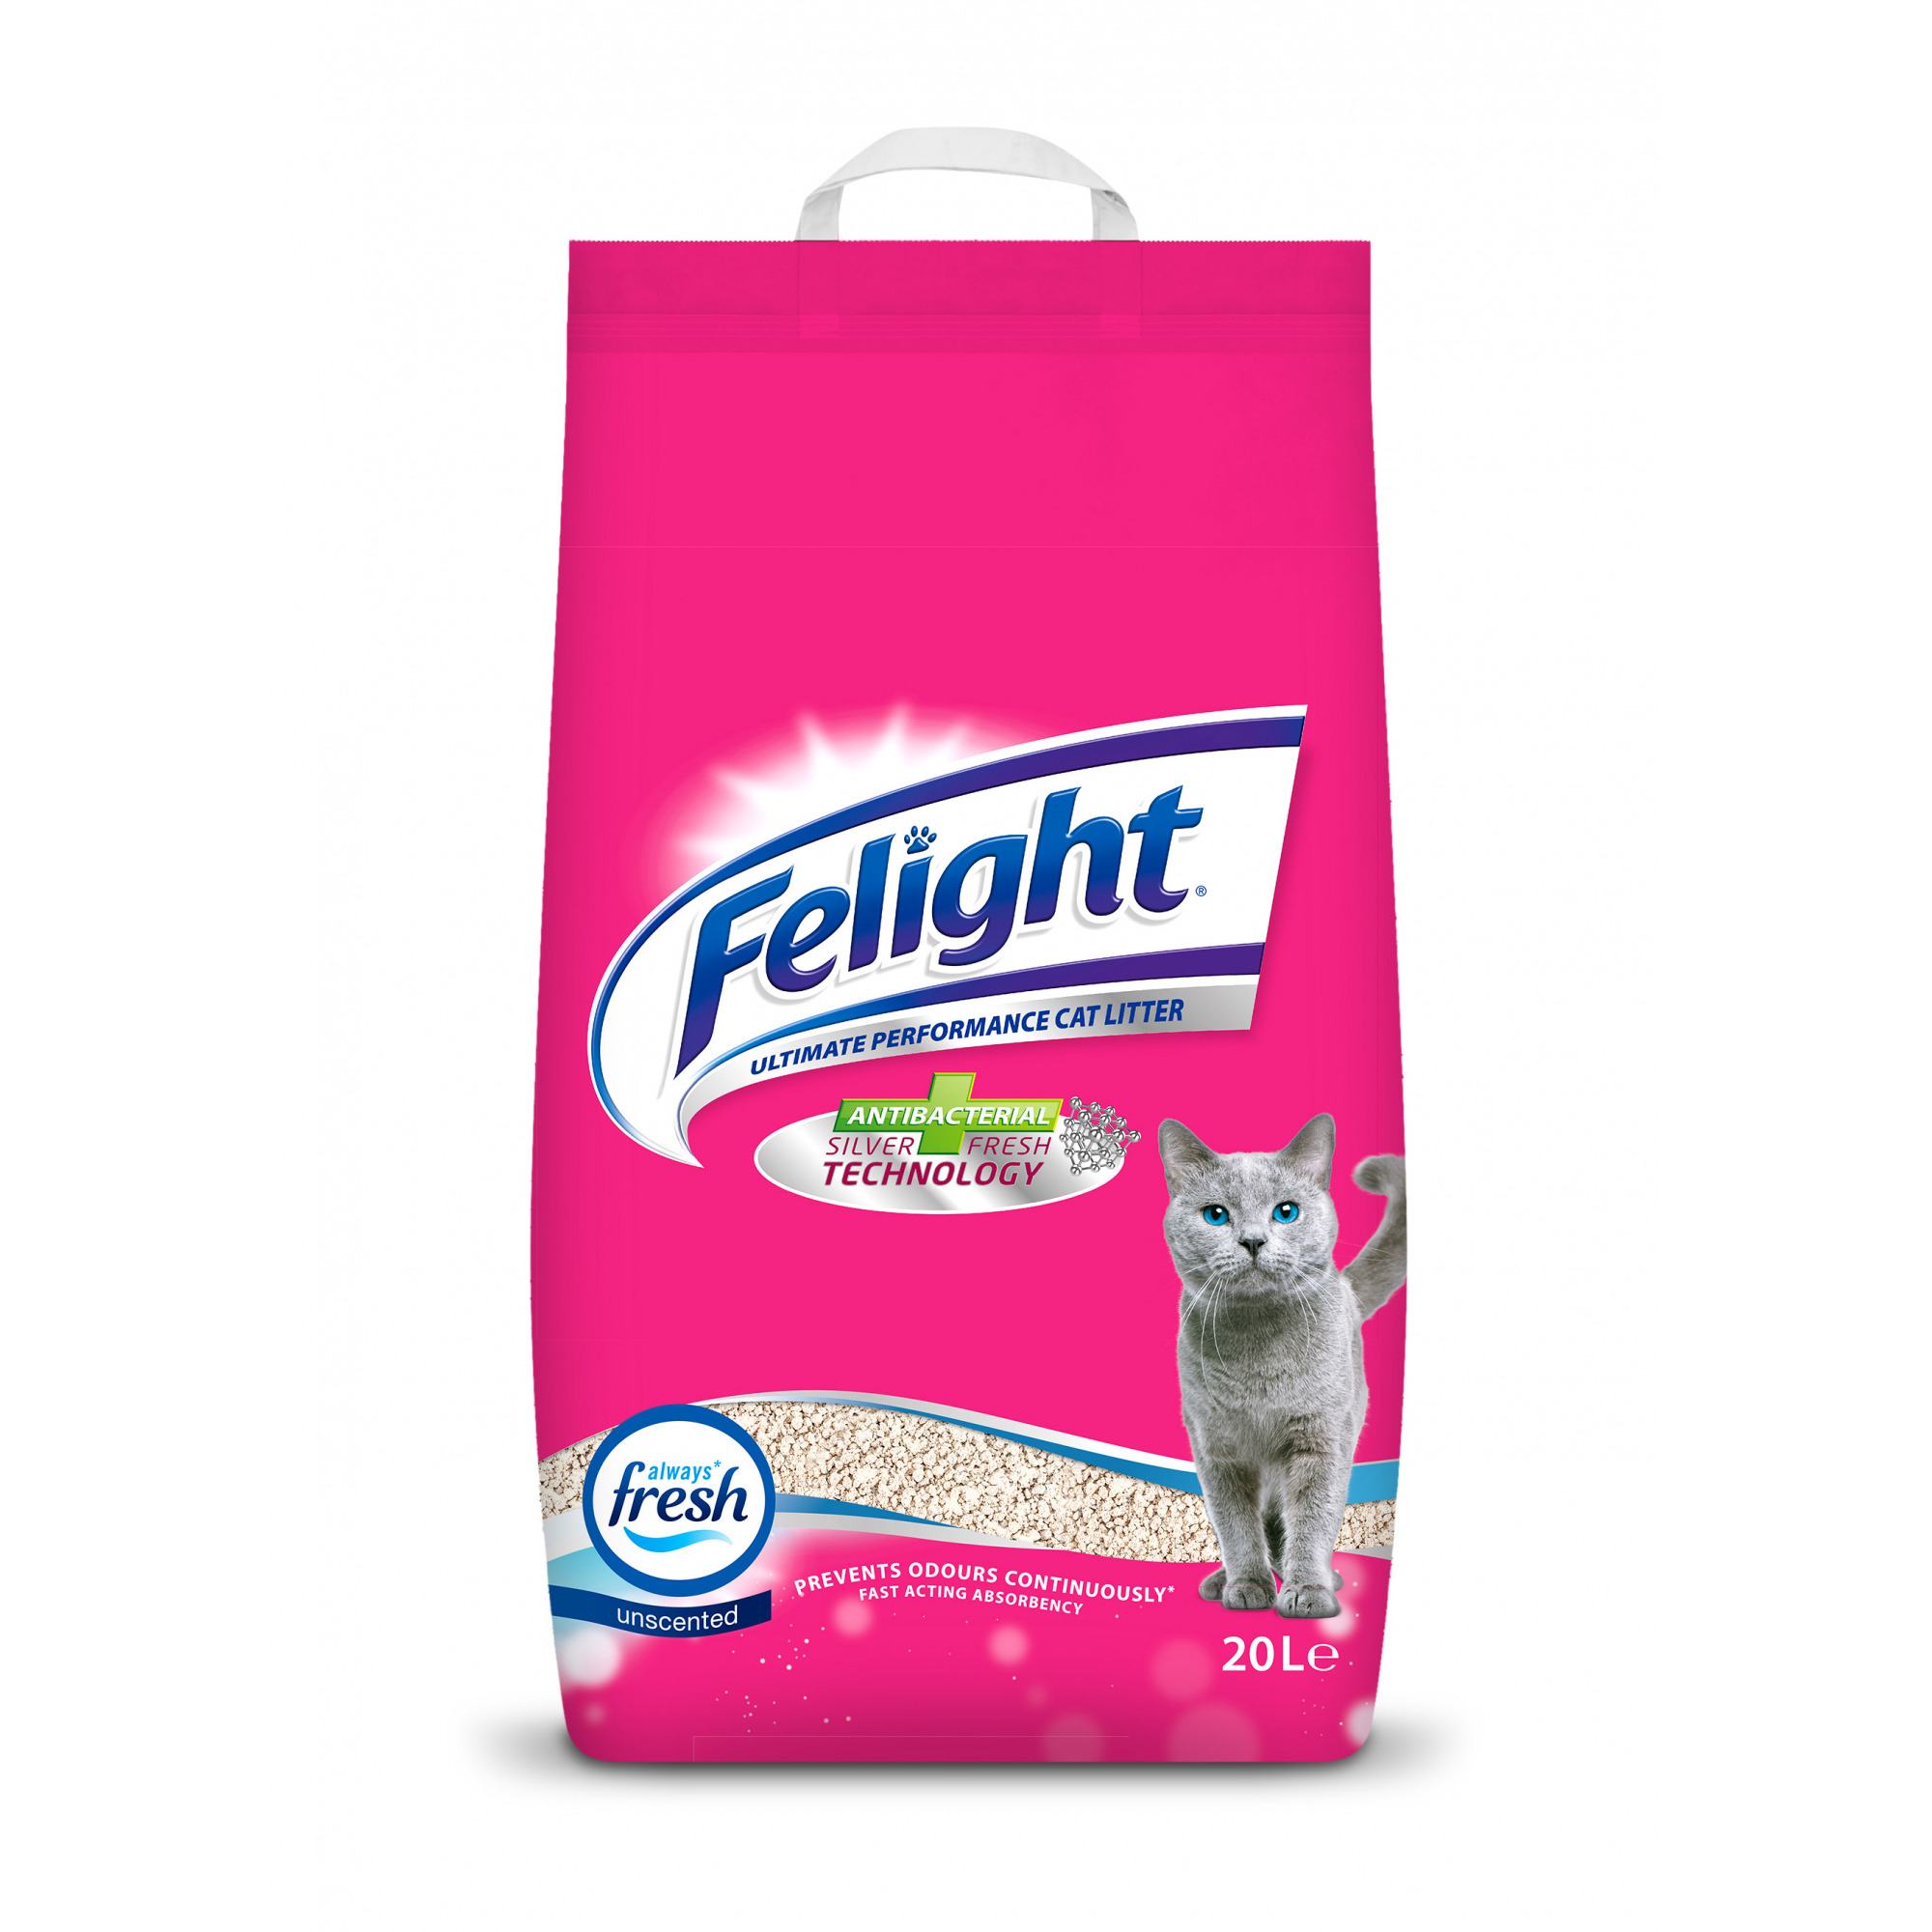 Felight Cat Litter VioVet.co.uk FREE delivery available